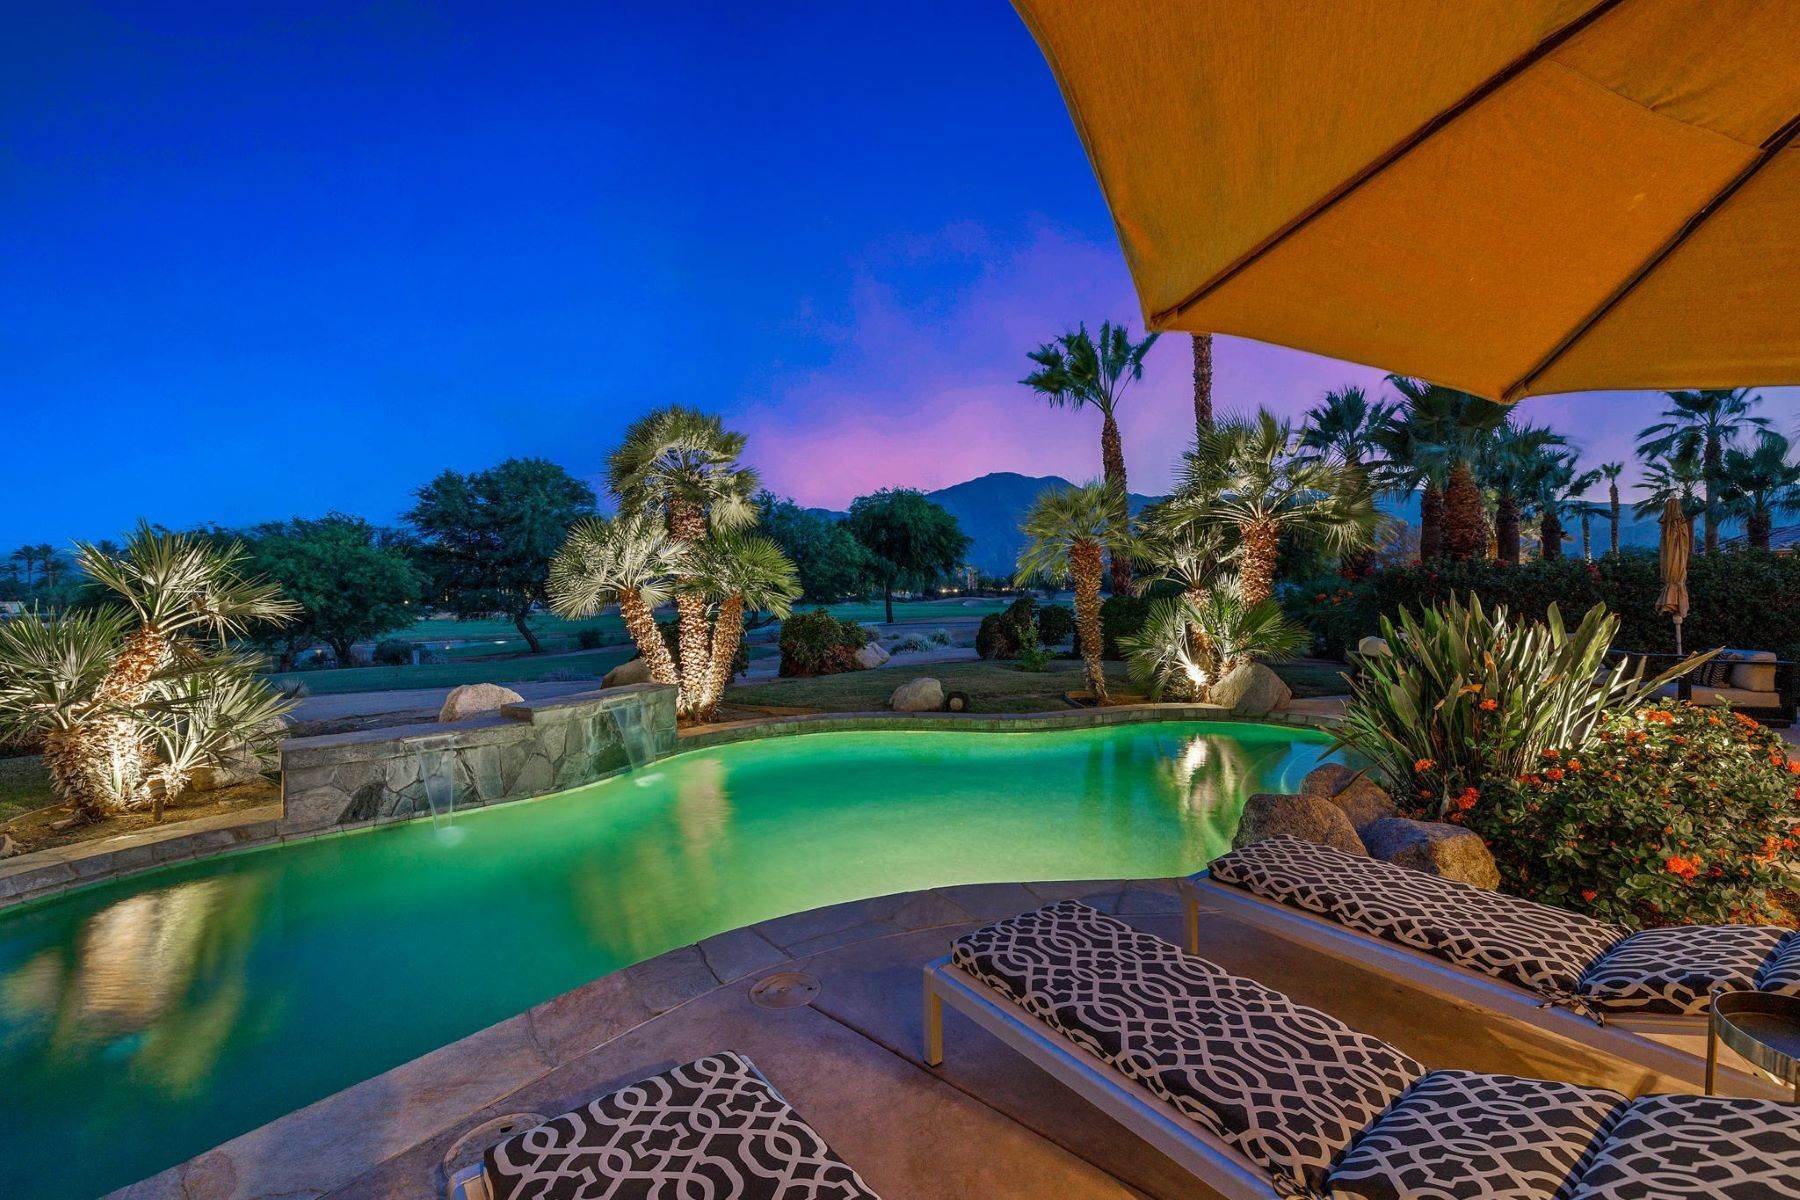 Single Family Homes for Sale at Ideally located PGA West getaway 81575 Tiburon Drive La Quinta, California 92253 United States